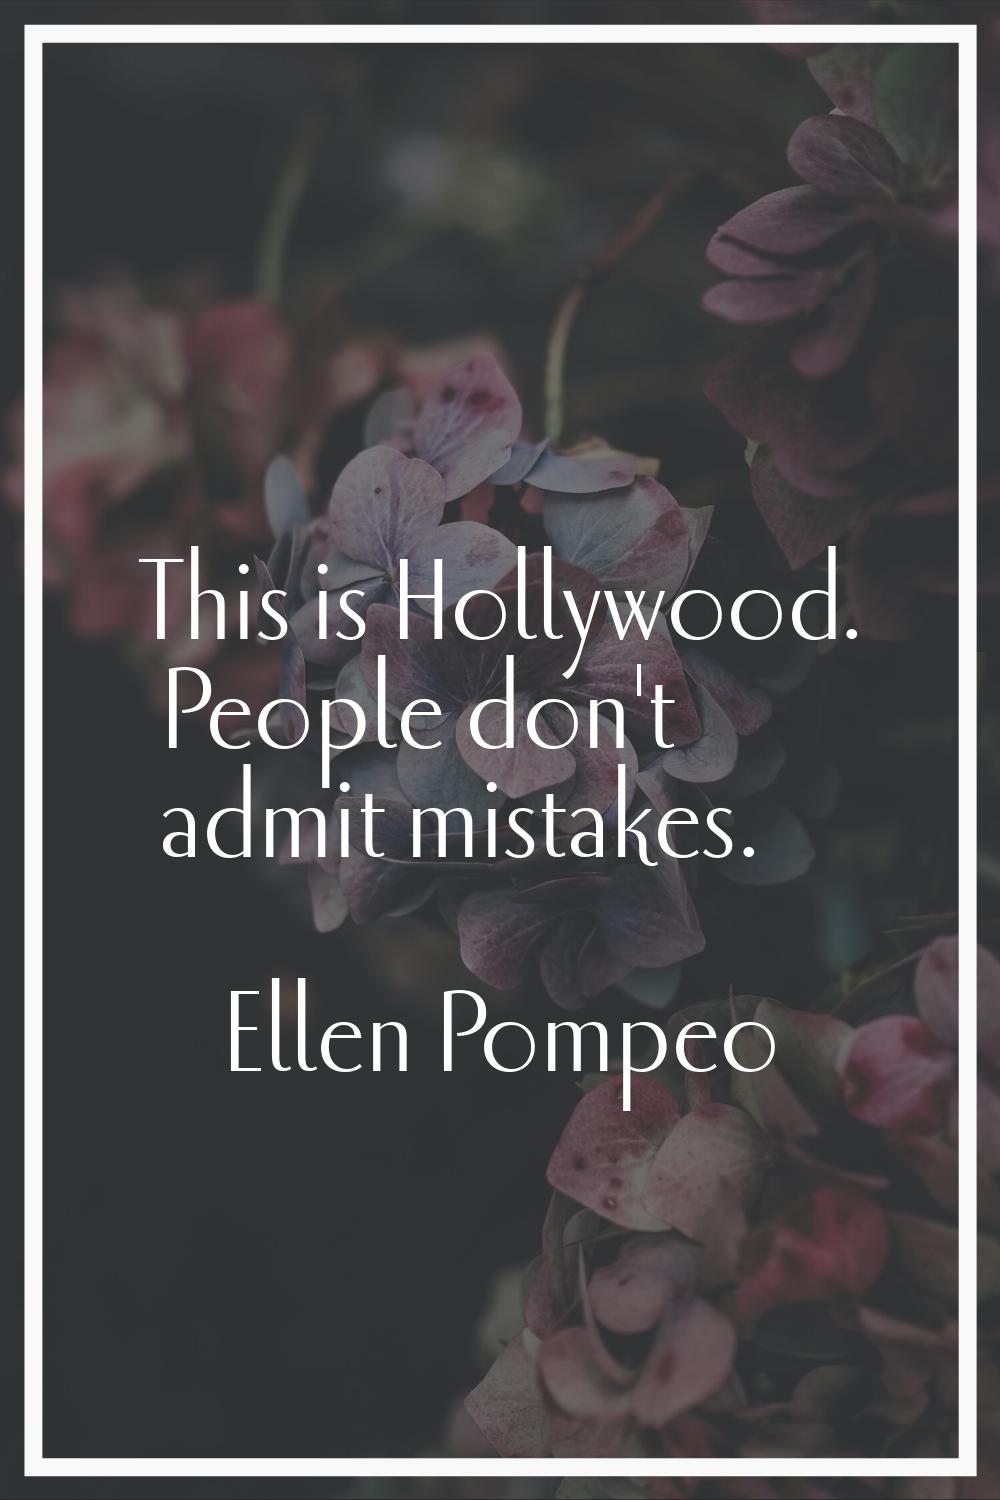 This is Hollywood. People don't admit mistakes.